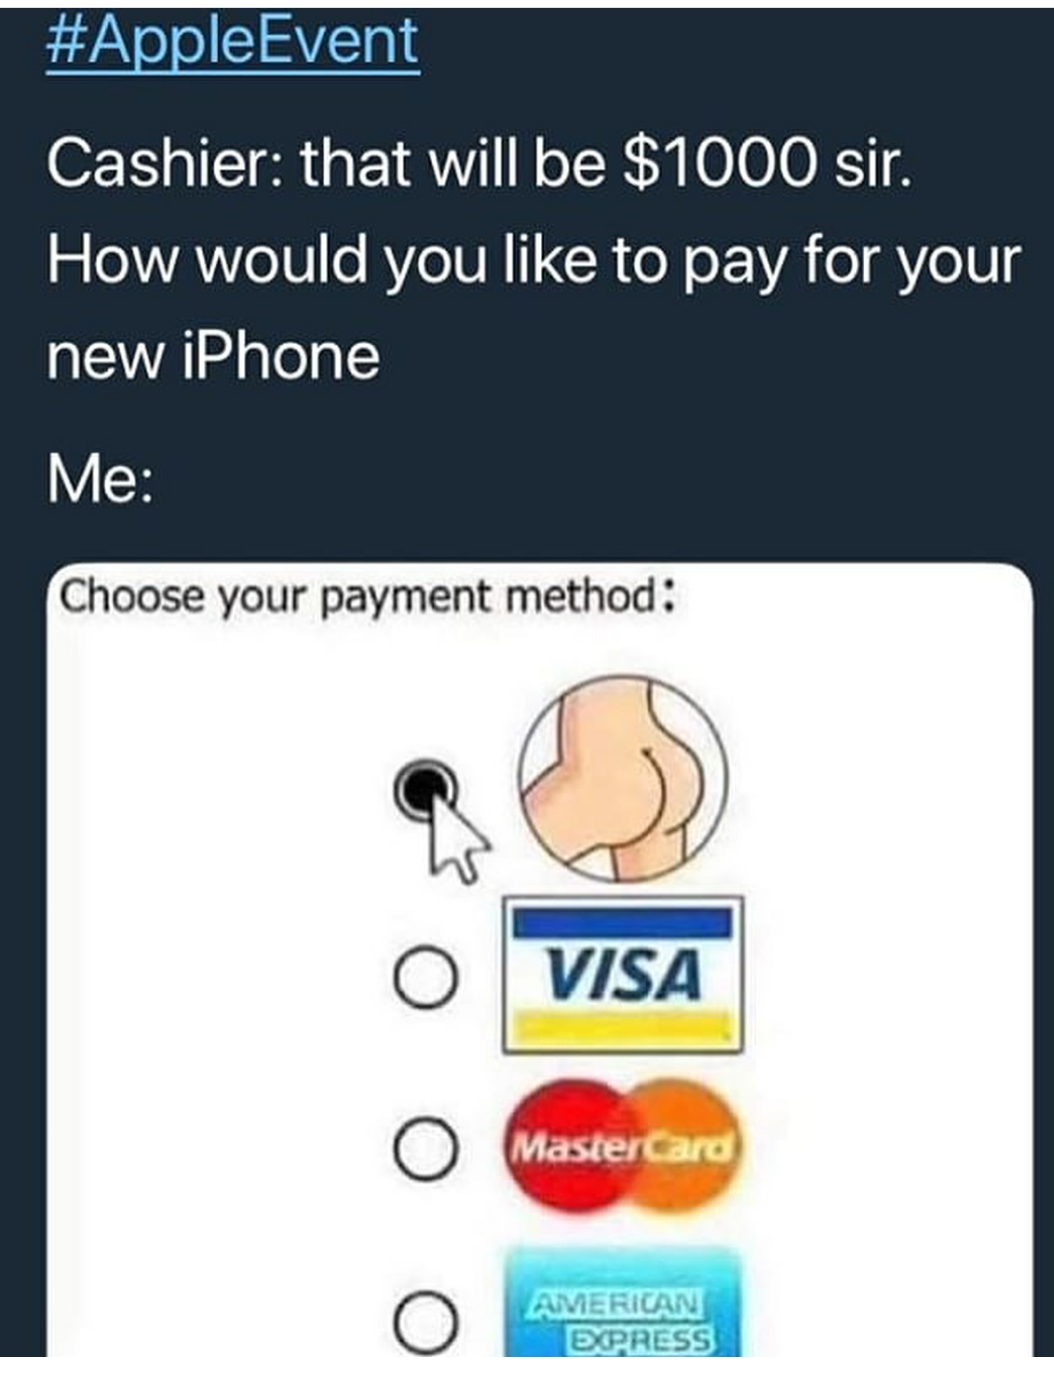 memes - loadcentral - Cashier that will be $1000 sir. How would you to pay for your new iPhone Me Choose your payment method 0 Visa 0 MasterCard 0 American Express